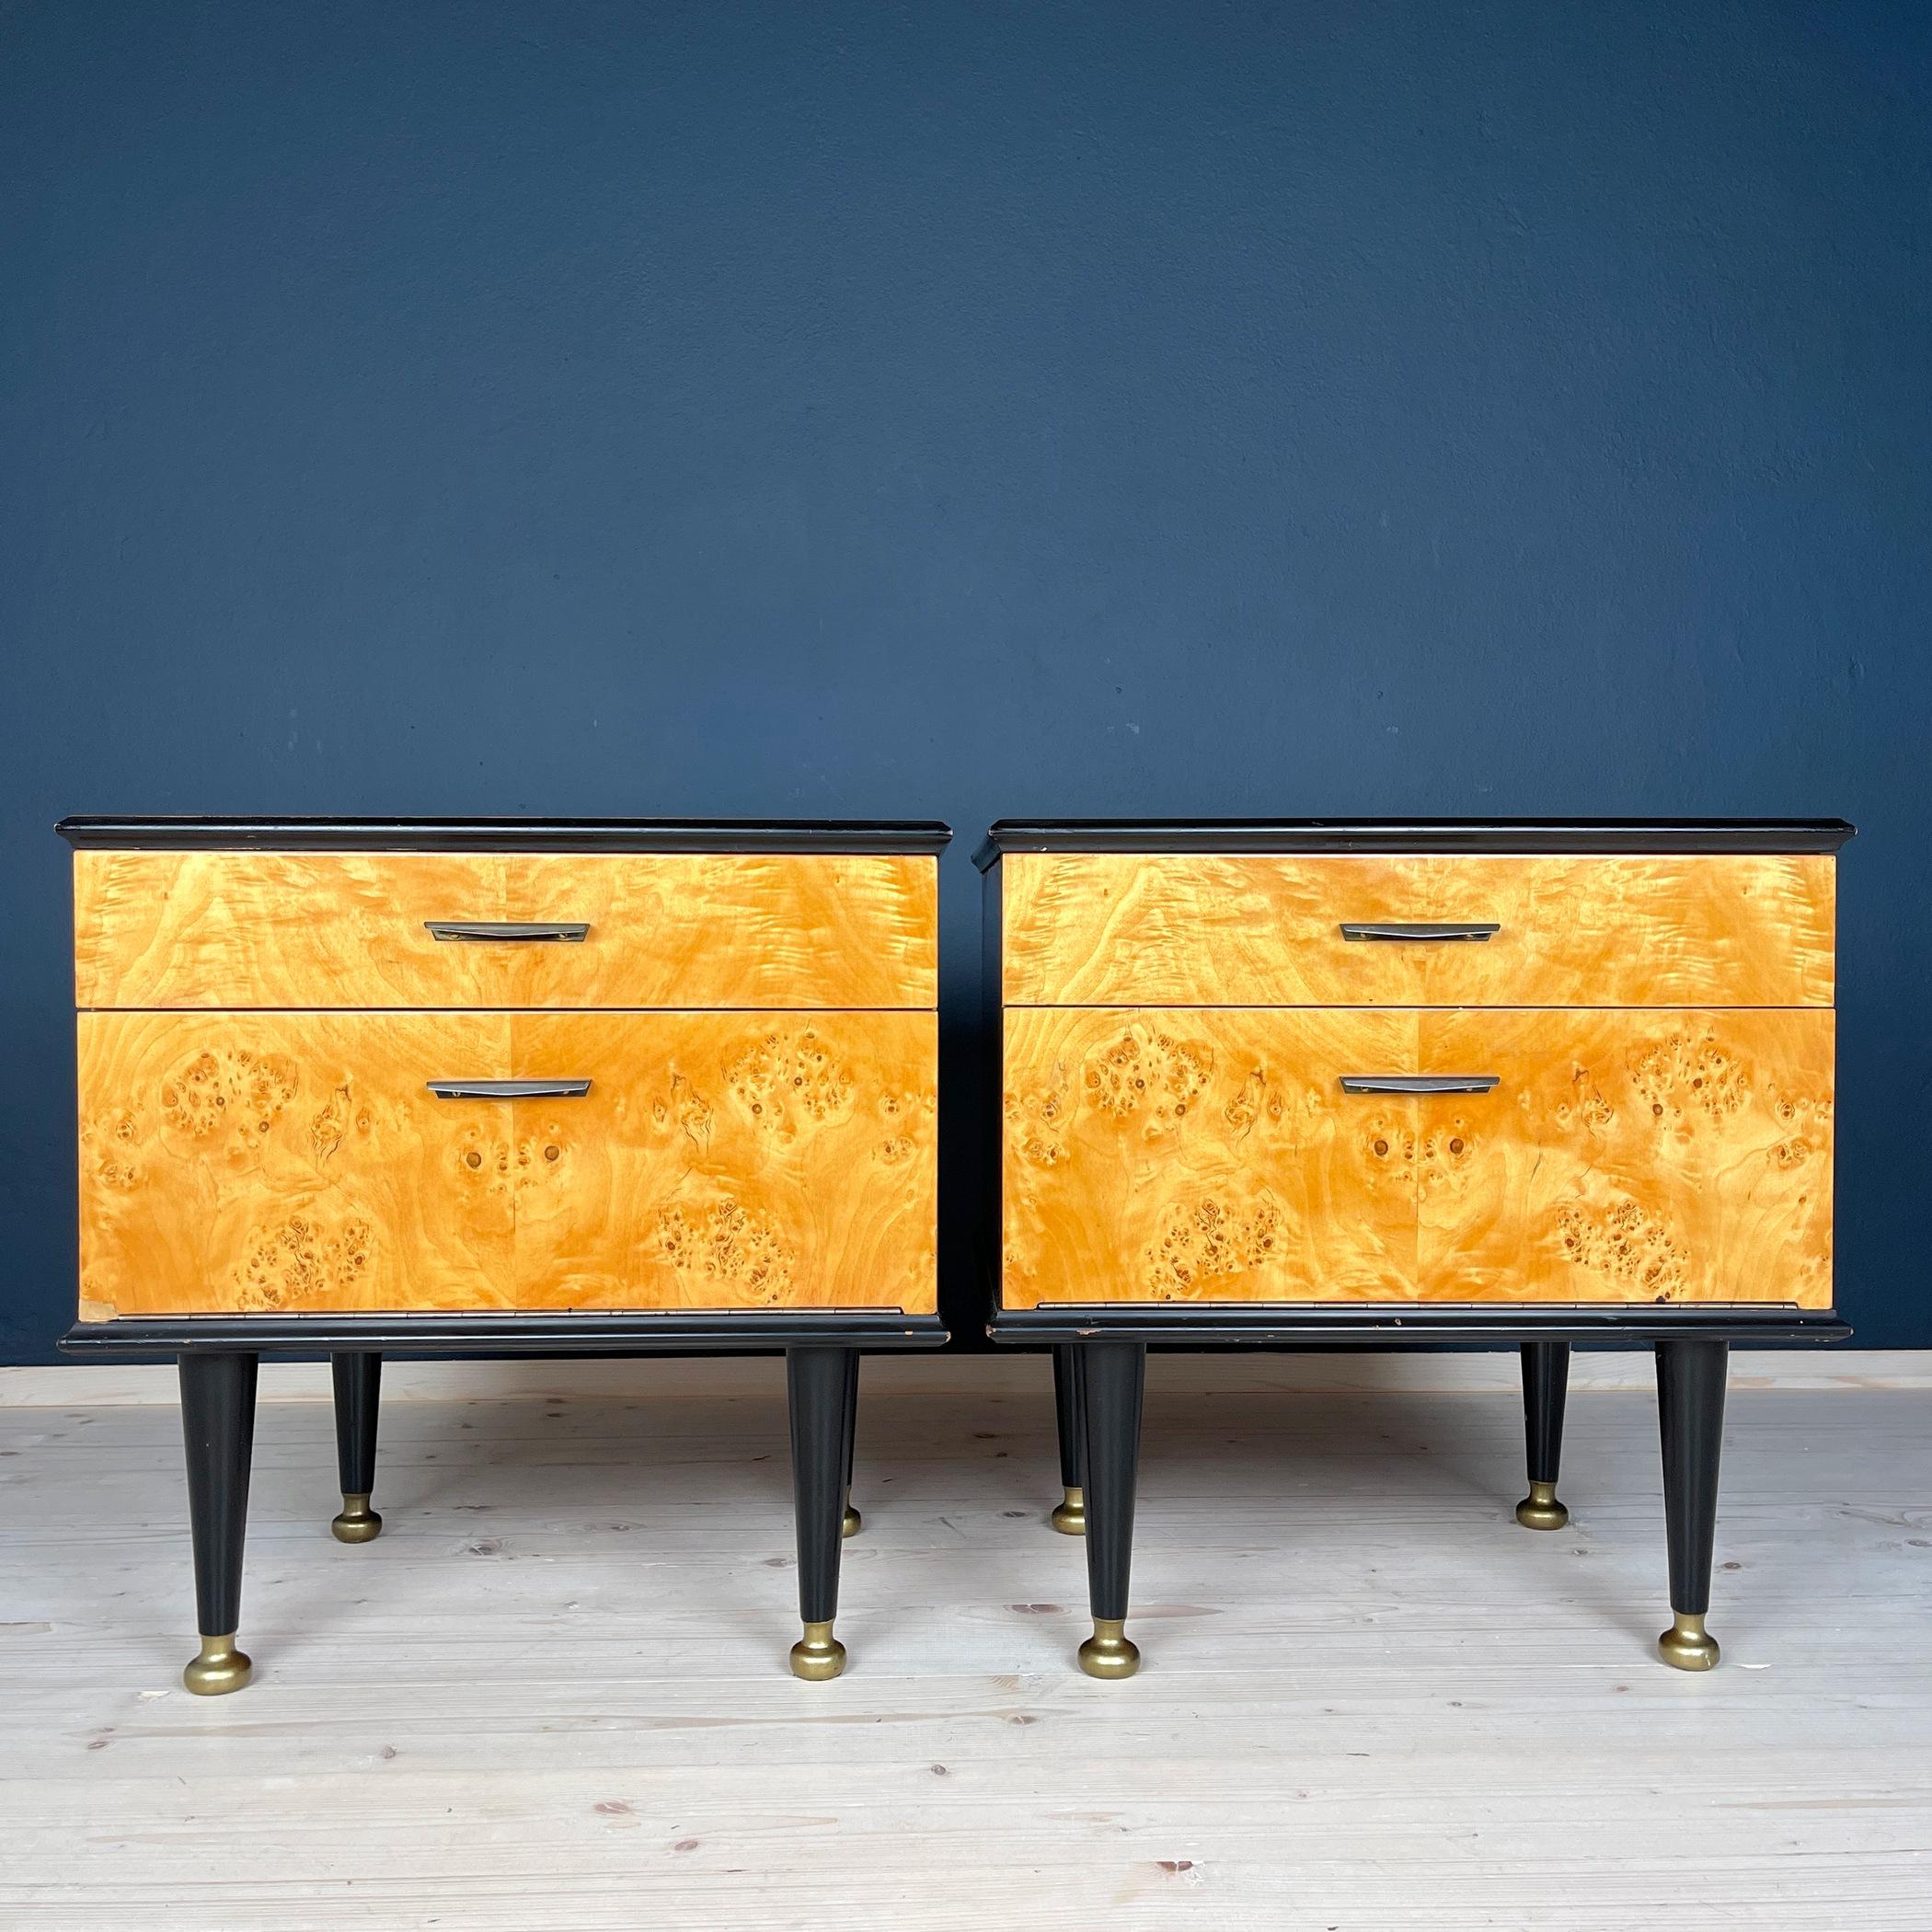 Introducing a pair of exquisite bedside tables, crafted in the 1970s by the esteemed Yugoslavian company DIK, located in Nova Gradiska, which is situated in present-day Croatia. These tables are a testament to the fine craftsmanship of the era.